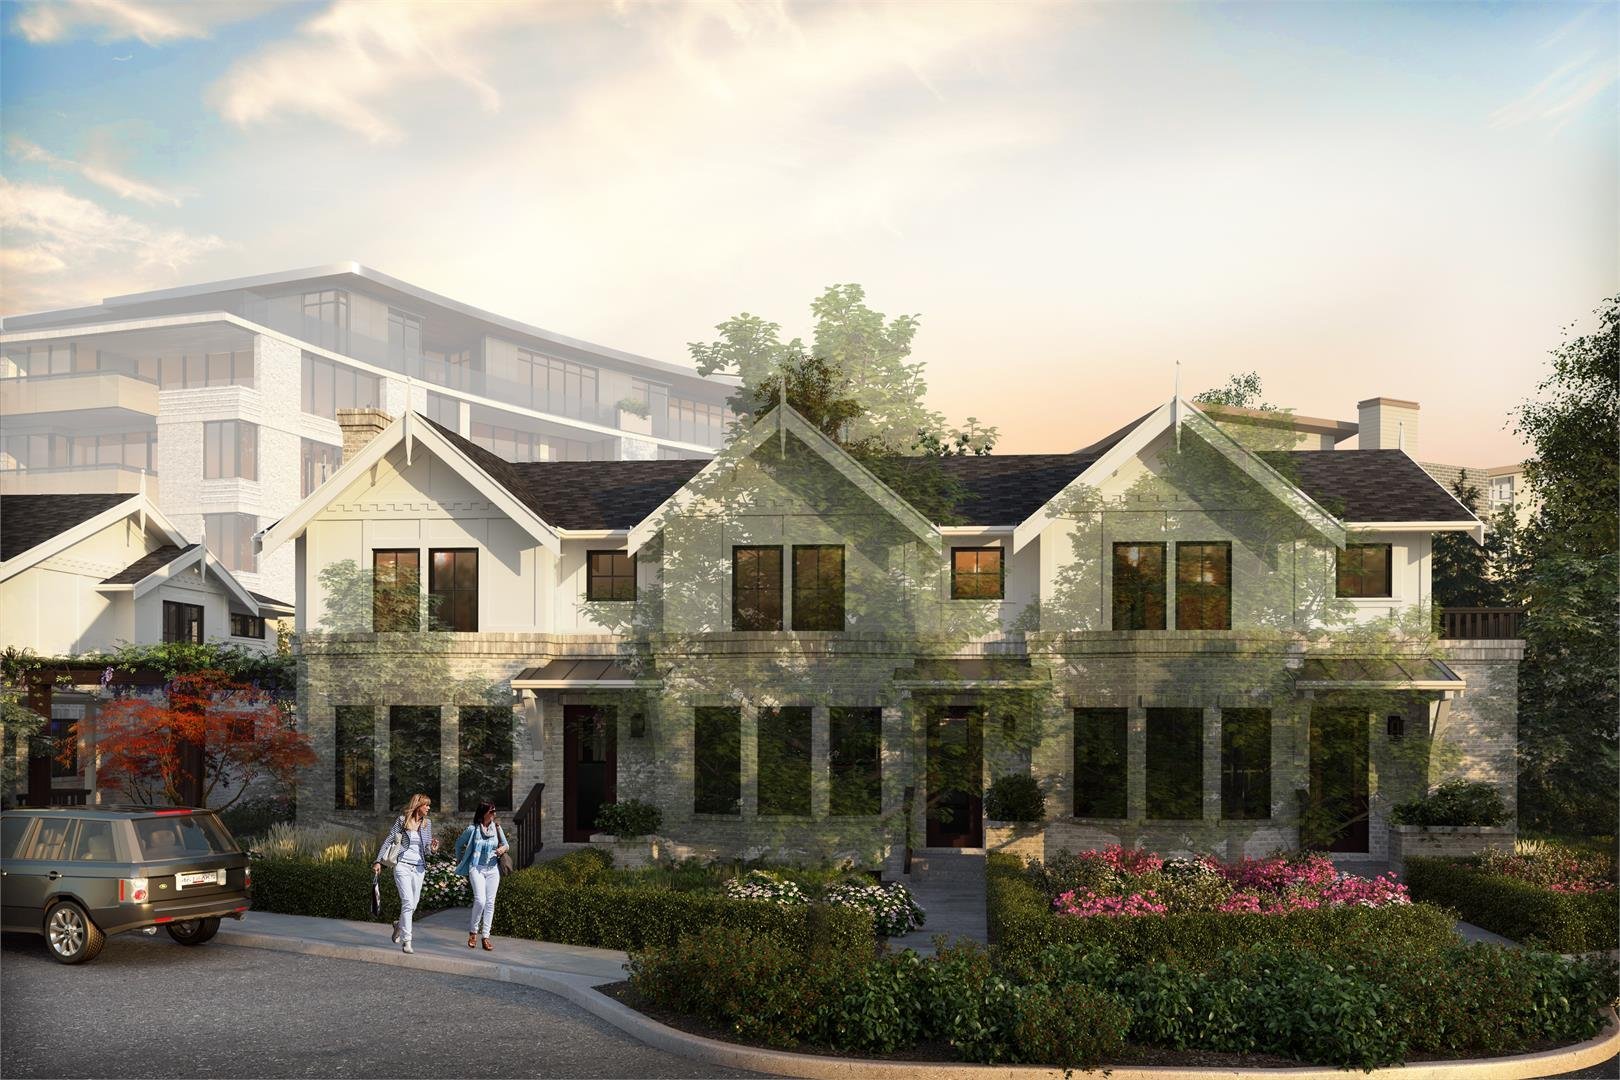 Cypress at Bellewood Park - 1018 Pentrelew Place - by Abstract Development!